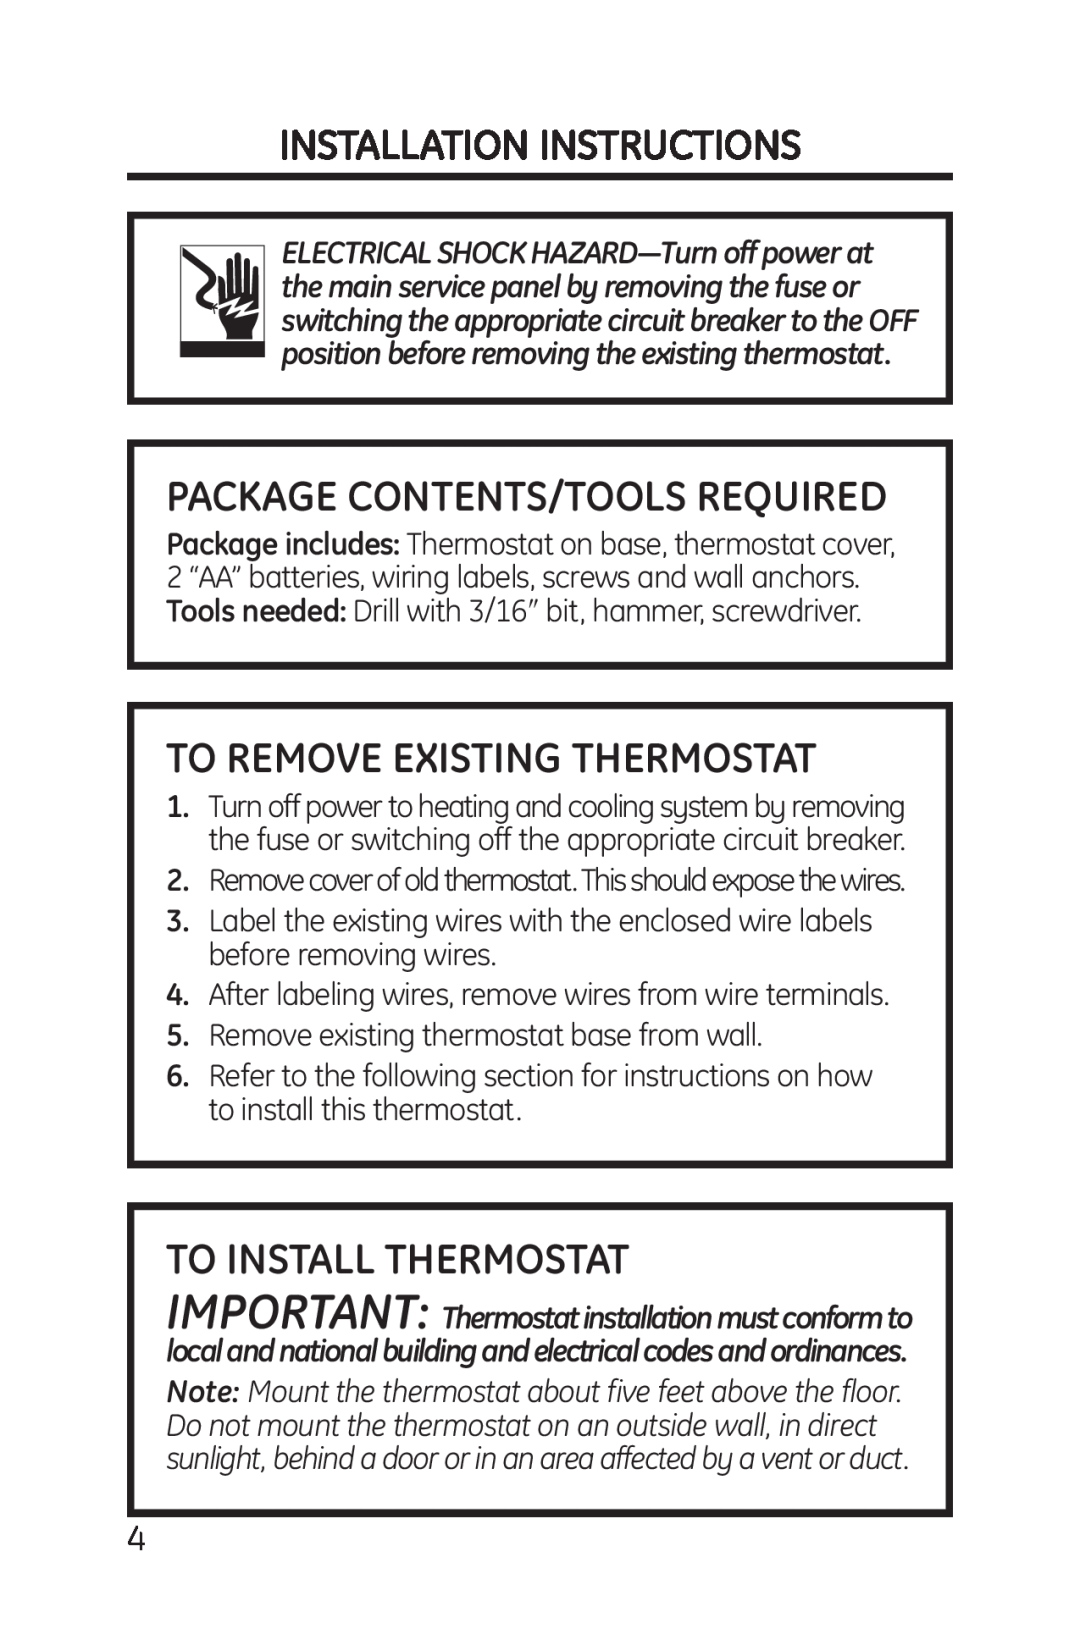 GE RAK164P1, RAK148P1 Installation Instructions, Package Contents/Tools Required, To Remove Existing Thermostat 